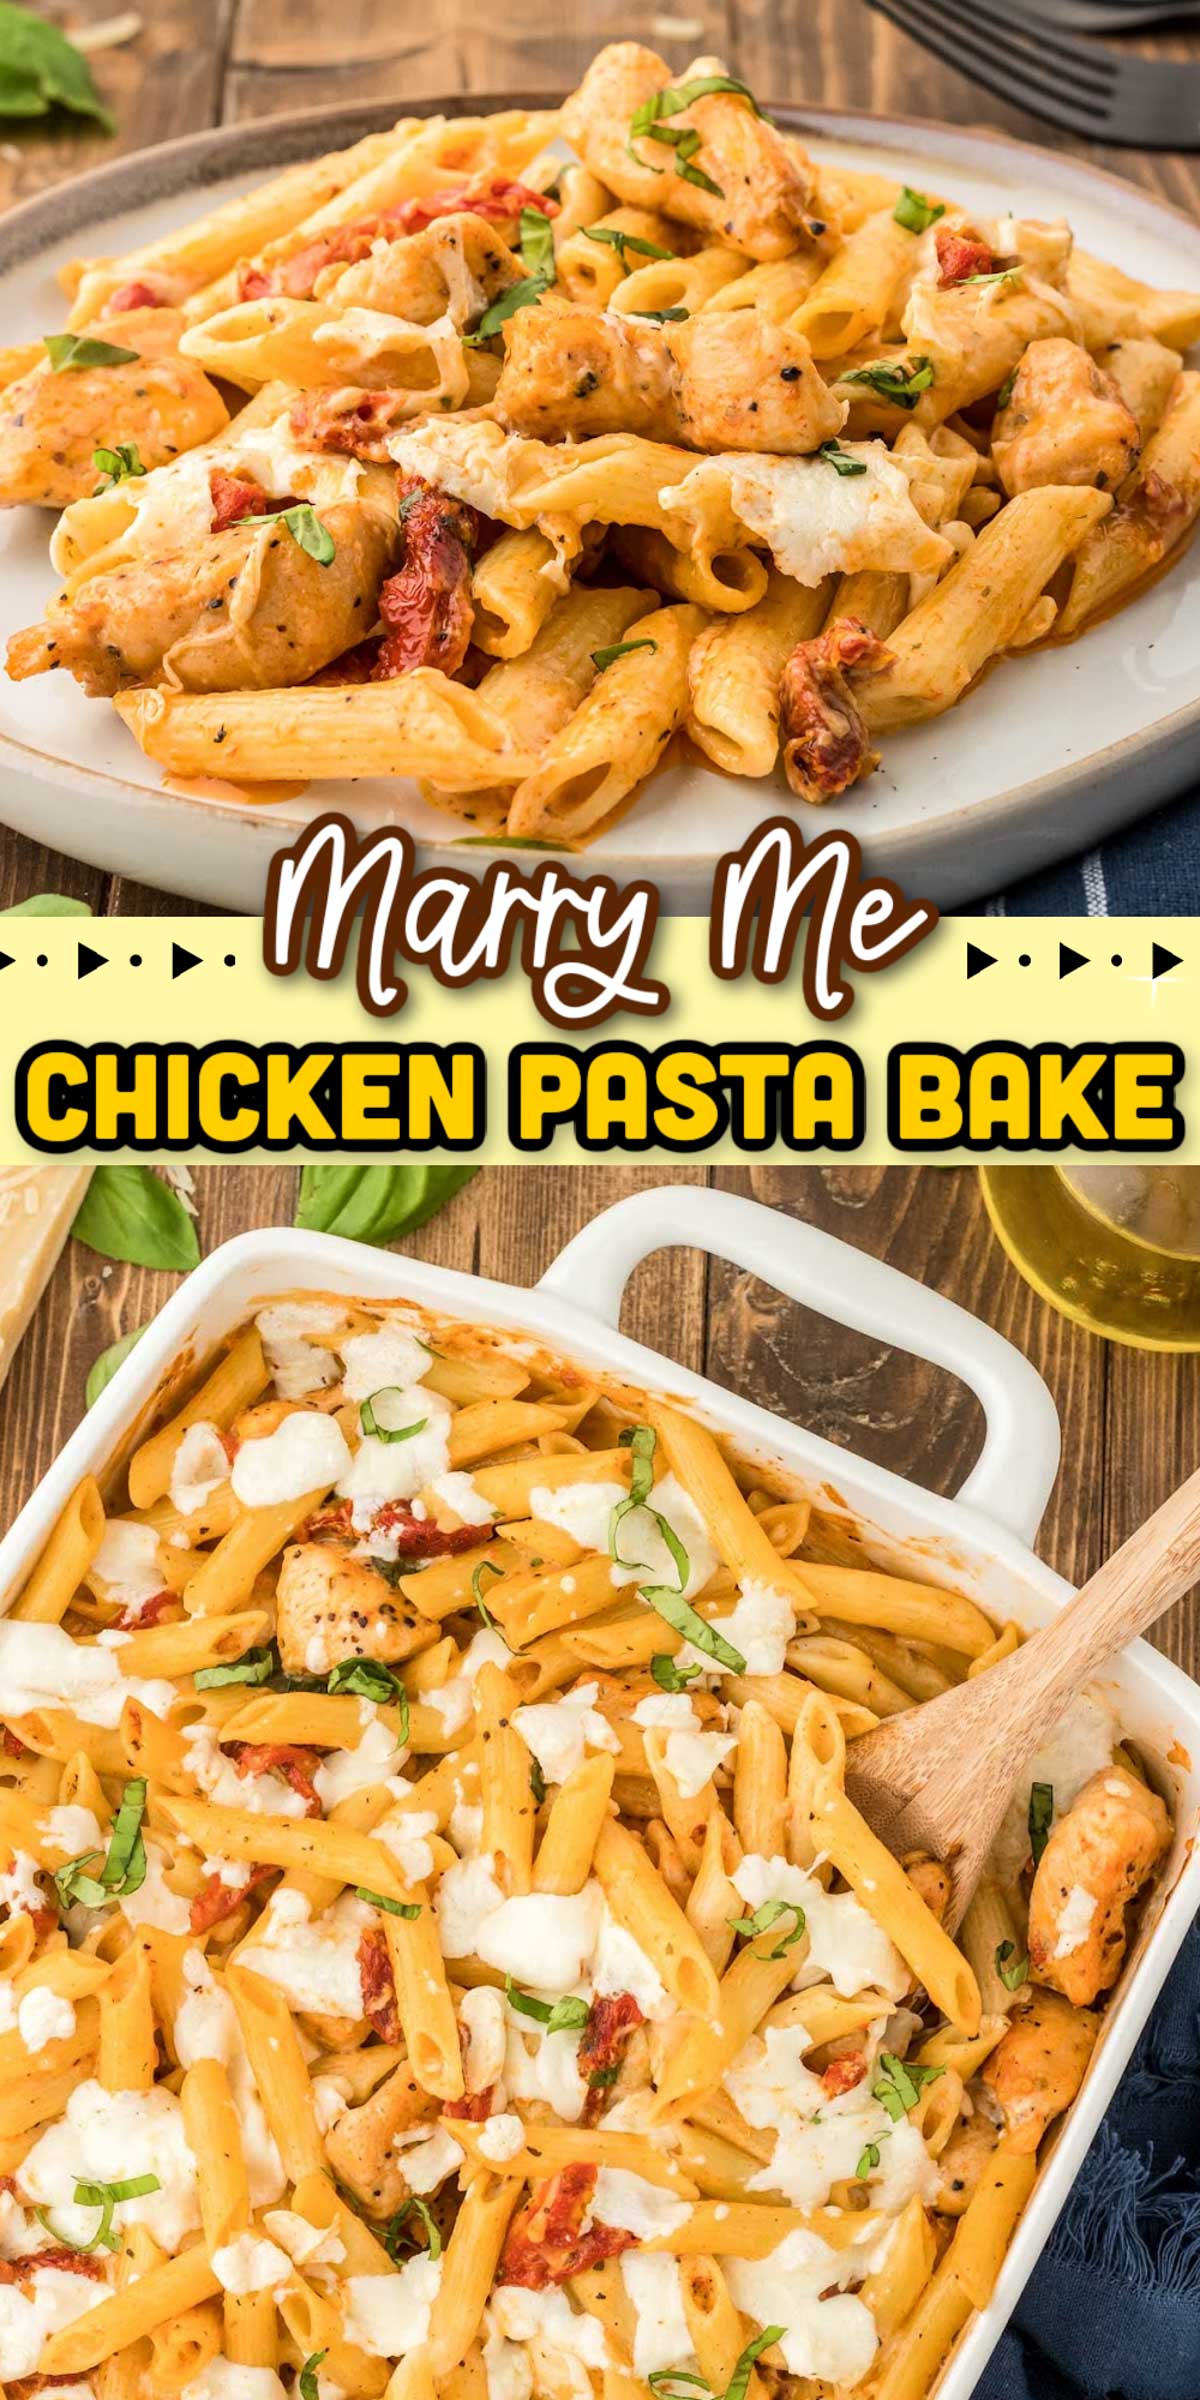 Marry Me Chicken Pasta Casserole is the family-style version of the viral TikTok dish that's filled with chicken, pasta, sundried tomatoes, basil, spices, and creamy cheese sauce!  via @sugarandsoulco